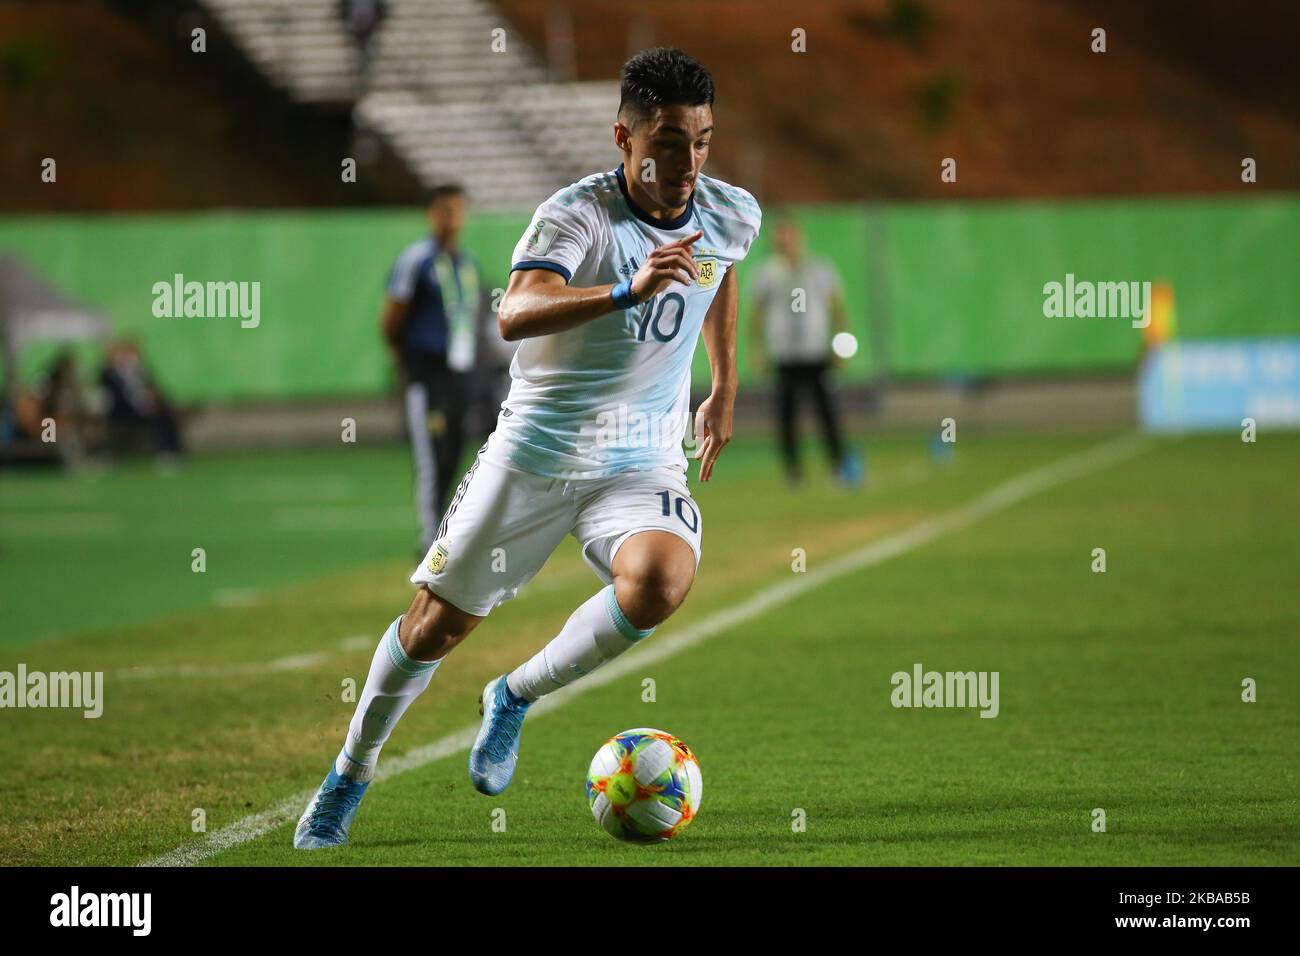 Matias Palacios of Argentina controls the ball during the FIFA U-17 World Cup Brazil 2019 round of 16 match between Paraguay and Argentina at Estadio Kleber Andrade on November 07, 2019 in Vitoria, Brazil. Gilson Borba/NurPhoto) Stock Photo